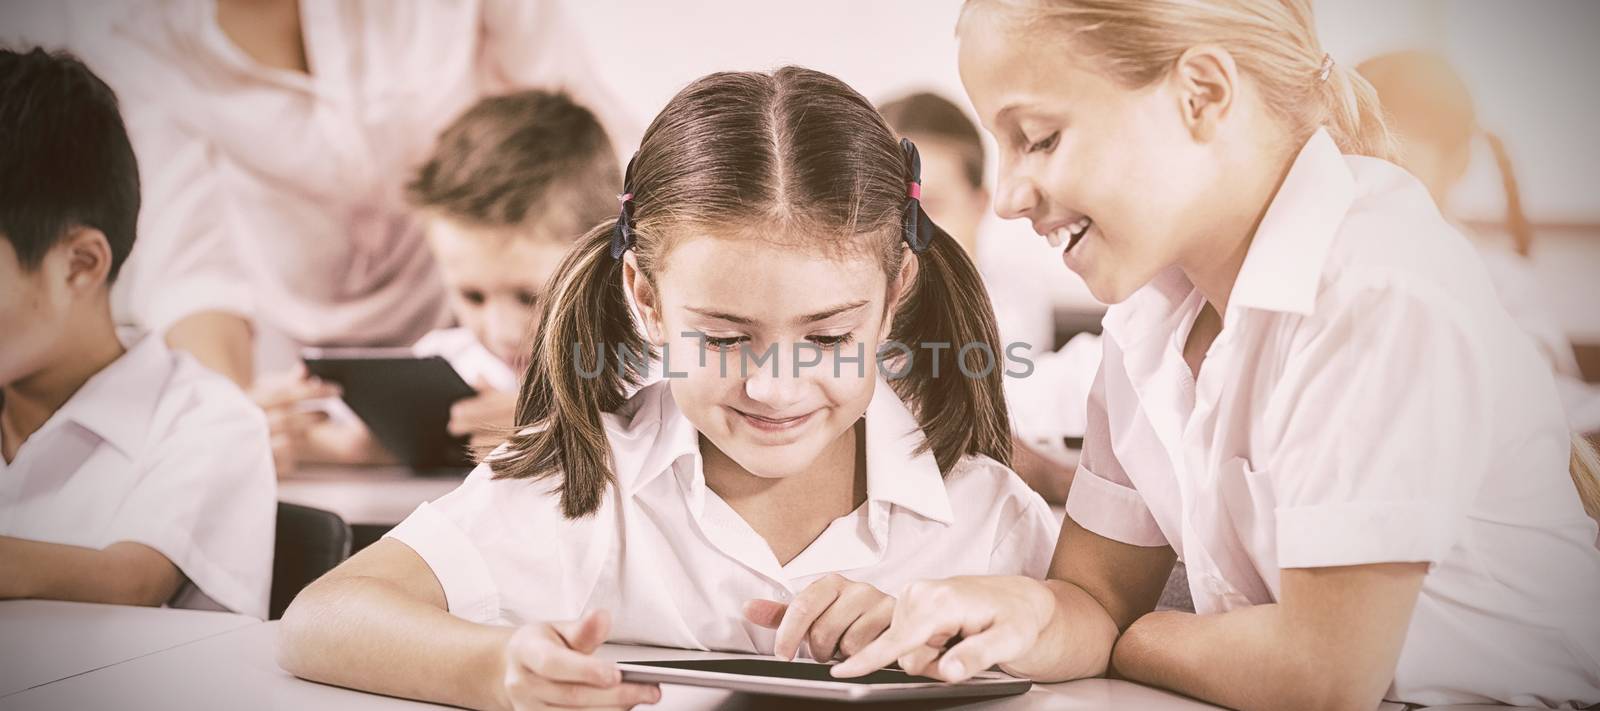 Smiling children using digital tablets in classroom at school